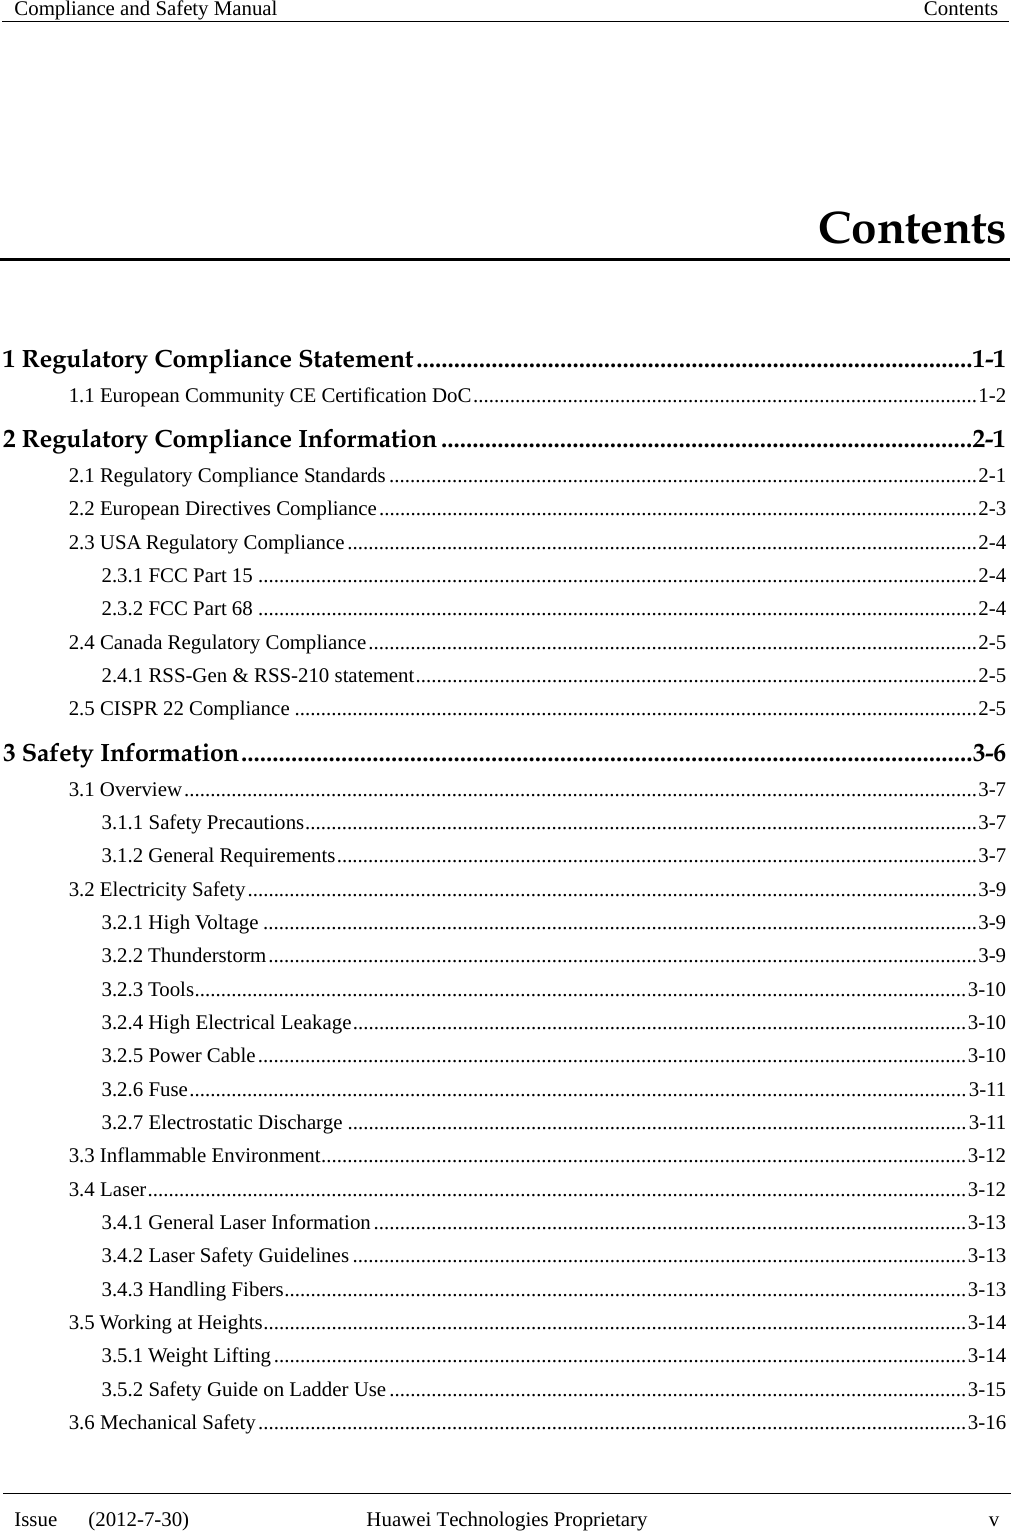 Compliance and Safety Manual  Contents  Issue   (2012-7-30)  Huawei Technologies Proprietary  v Contents 1 Regulatory Compliance Statement ......................................................................................... 1-11.1 European Community CE Certification DoC ................................................................................................ 1-22 Regulatory Compliance Information ..................................................................................... 2-12.1 Regulatory Compliance Standards ................................................................................................................ 2-12.2 European Directives Compliance .................................................................................................................. 2-32.3 USA Regulatory Compliance ........................................................................................................................ 2-42.3.1 FCC Part 15 ......................................................................................................................................... 2-42.3.2 FCC Part 68 ......................................................................................................................................... 2-42.4 Canada Regulatory Compliance .................................................................................................................... 2-52.4.1 RSS-Gen &amp; RSS-210 statement ........................................................................................................... 2-52.5 CISPR 22 Compliance .................................................................................................................................. 2-53 Safety Information ..................................................................................................................... 3-63.1 Overview ....................................................................................................................................................... 3-73.1.1 Safety Precautions ................................................................................................................................ 3-73.1.2 General Requirements .......................................................................................................................... 3-73.2 Electricity Safety ........................................................................................................................................... 3-93.2.1 High Voltage ........................................................................................................................................ 3-93.2.2 Thunderstorm ....................................................................................................................................... 3-93.2.3 Tools ................................................................................................................................................... 3-103.2.4 High Electrical Leakage ..................................................................................................................... 3-103.2.5 Power Cable ....................................................................................................................................... 3-103.2.6 Fuse .................................................................................................................................................... 3-113.2.7 Electrostatic Discharge ...................................................................................................................... 3-113.3 Inflammable Environment ........................................................................................................................... 3-123.4 Laser ............................................................................................................................................................ 3-123.4.1 General Laser Information ................................................................................................................. 3-133.4.2 Laser Safety Guidelines ..................................................................................................................... 3-133.4.3 Handling Fibers .................................................................................................................................. 3-133.5 Working at Heights ...................................................................................................................................... 3-143.5.1 Weight Lifting .................................................................................................................................... 3-143.5.2 Safety Guide on Ladder Use .............................................................................................................. 3-153.6 Mechanical Safety ....................................................................................................................................... 3-16